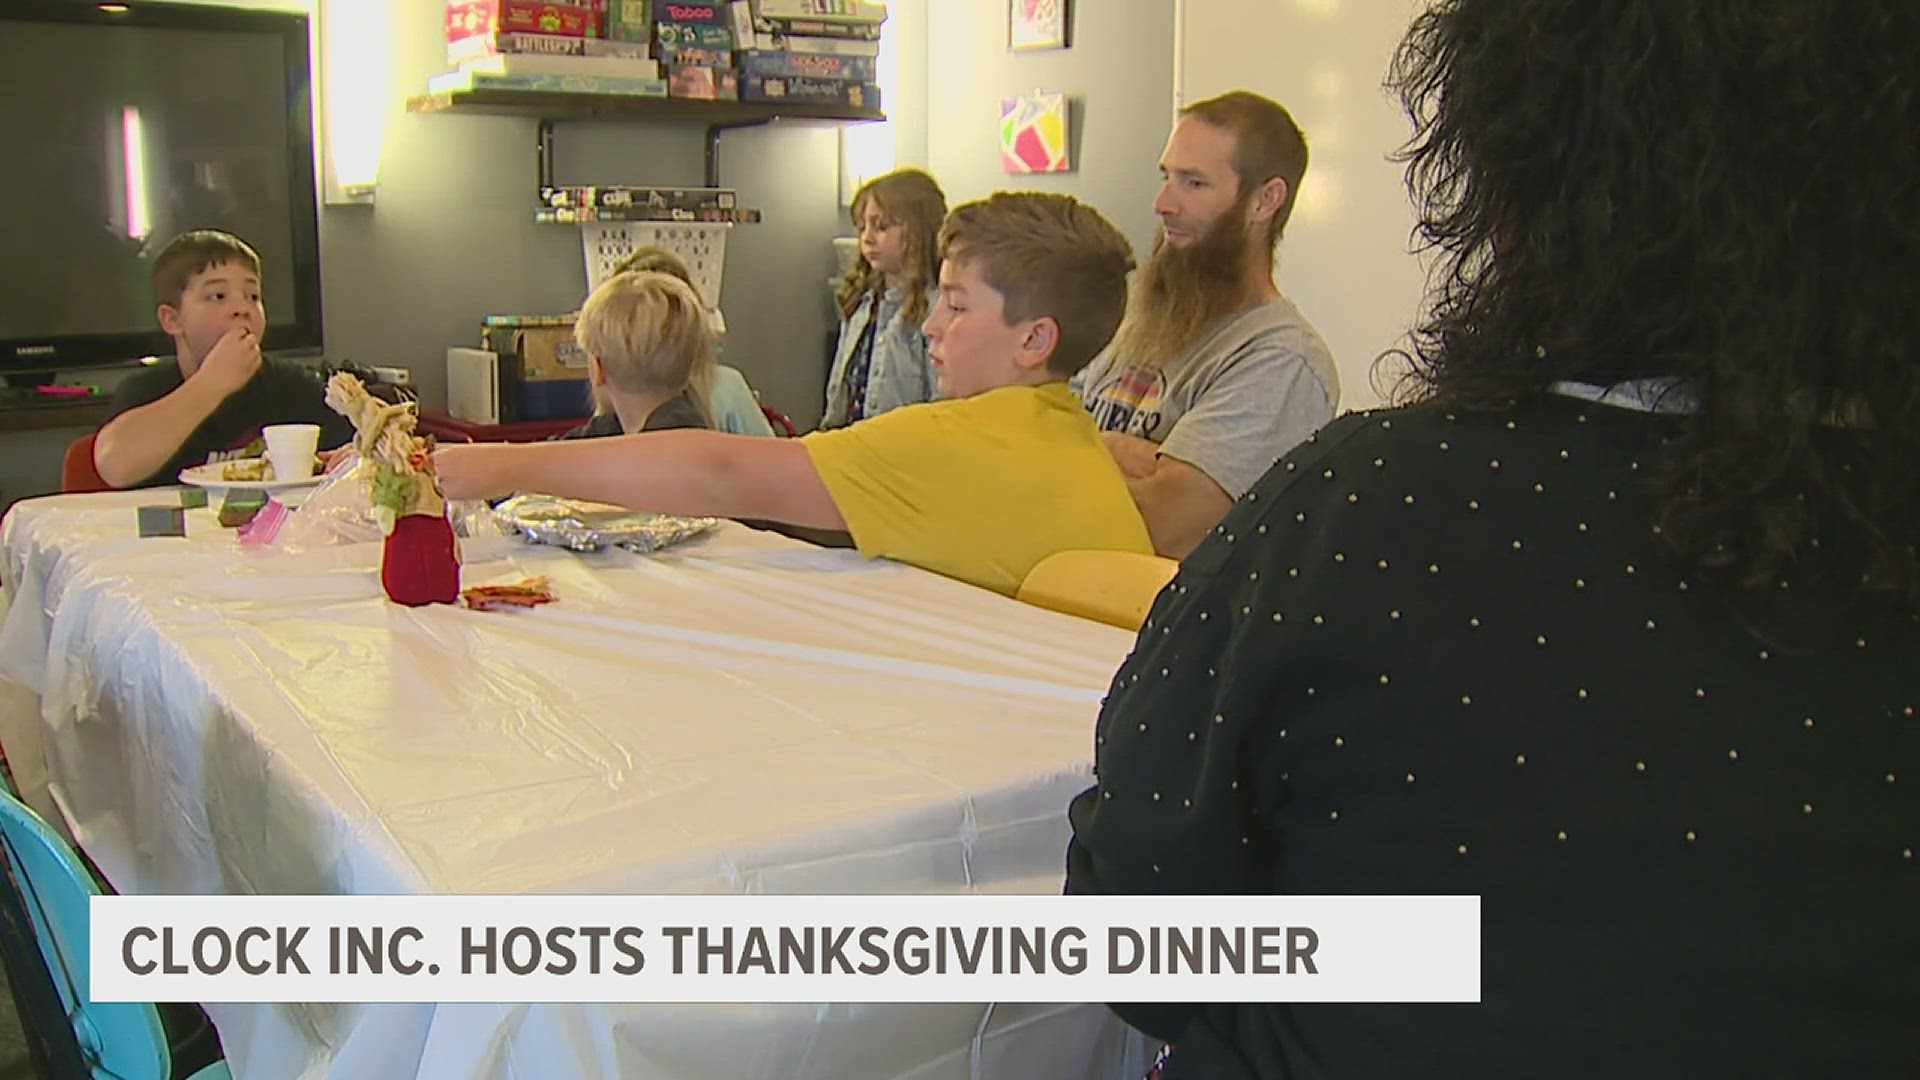 Clock Inc. has hosted Christmas celebrations for a few years. This is the first year they've done a Thanksgiving dinner, which organizers said was a success.